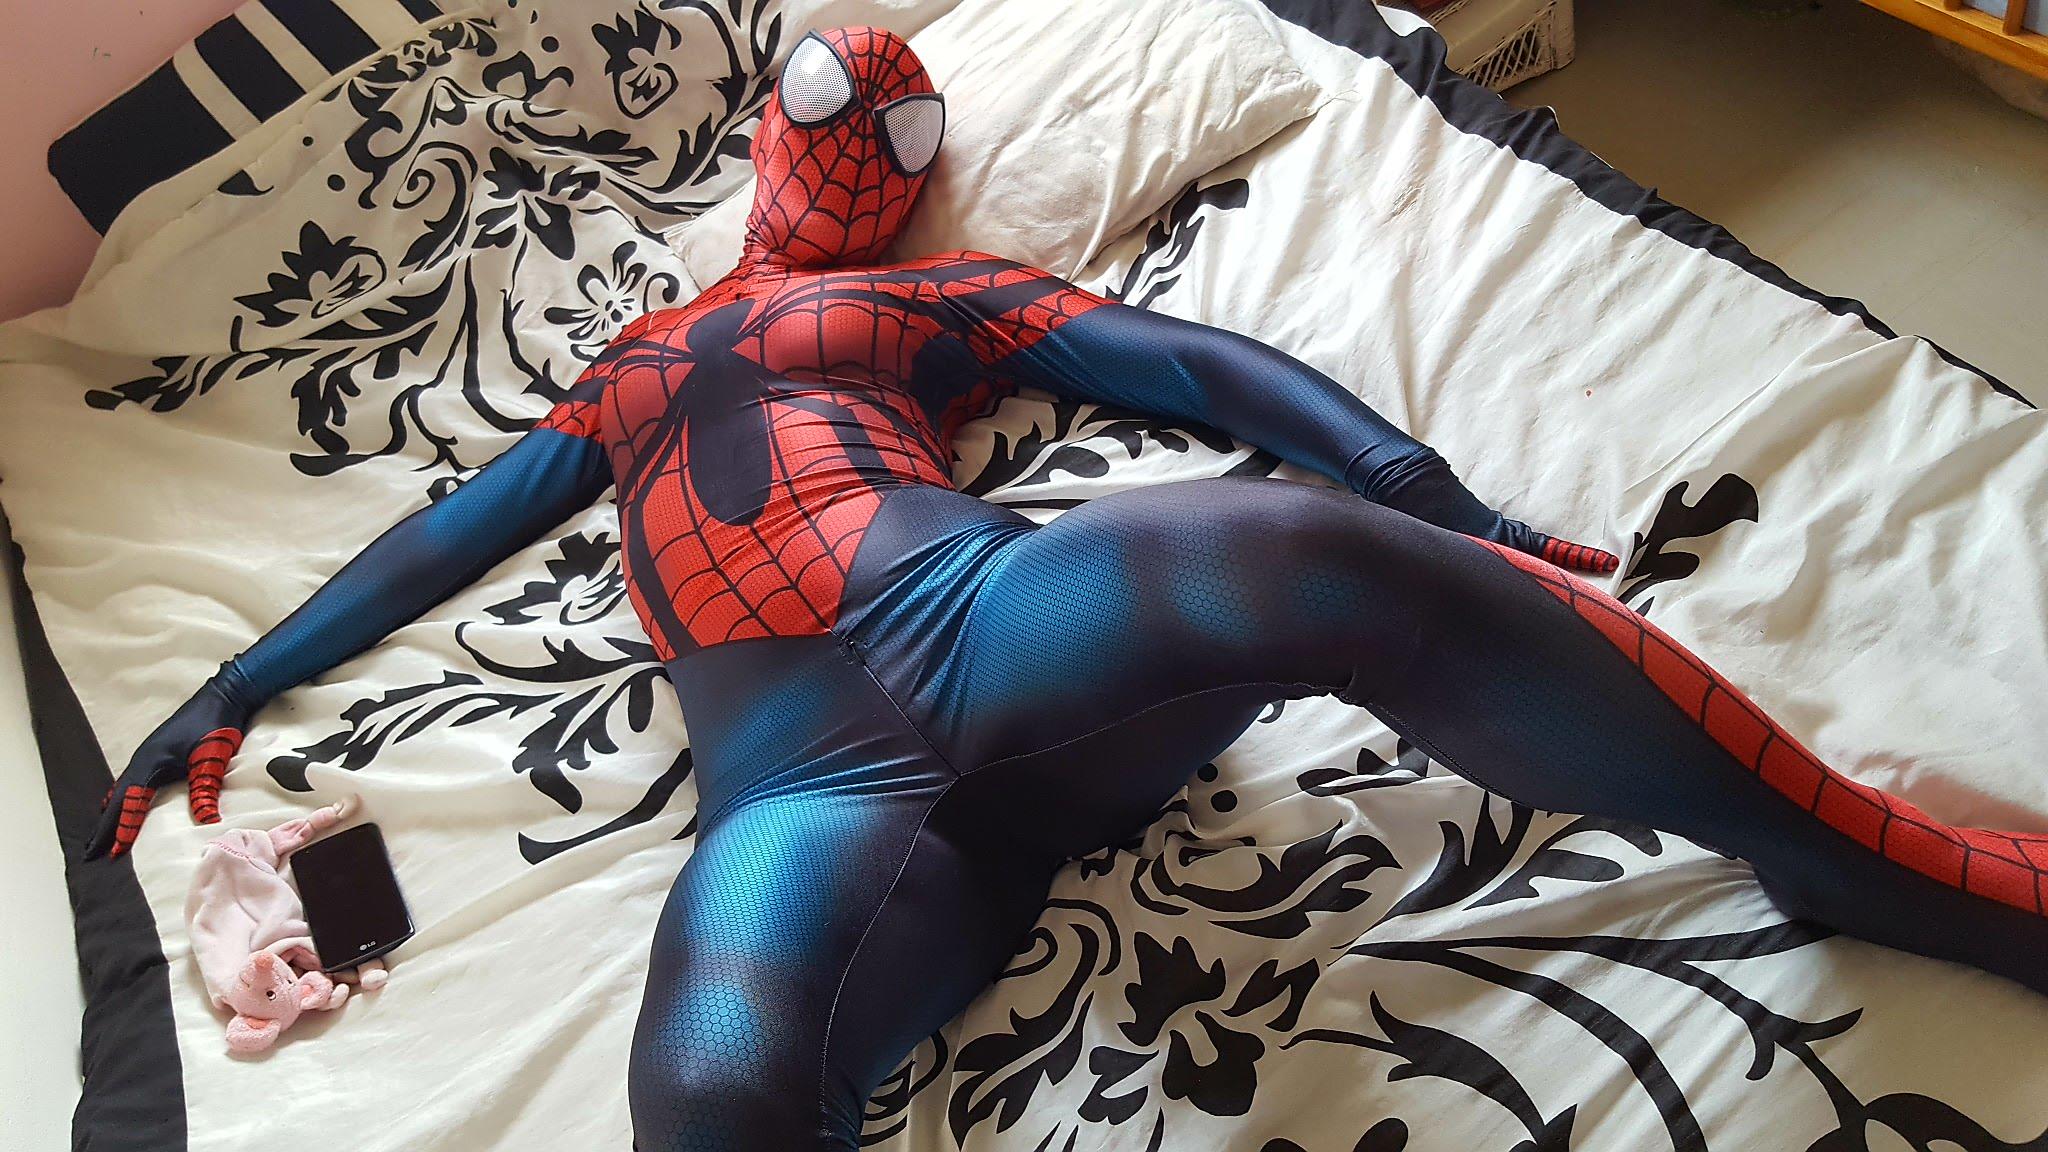 Spider Girl Porn - Pics From Shooting with Spider Girl